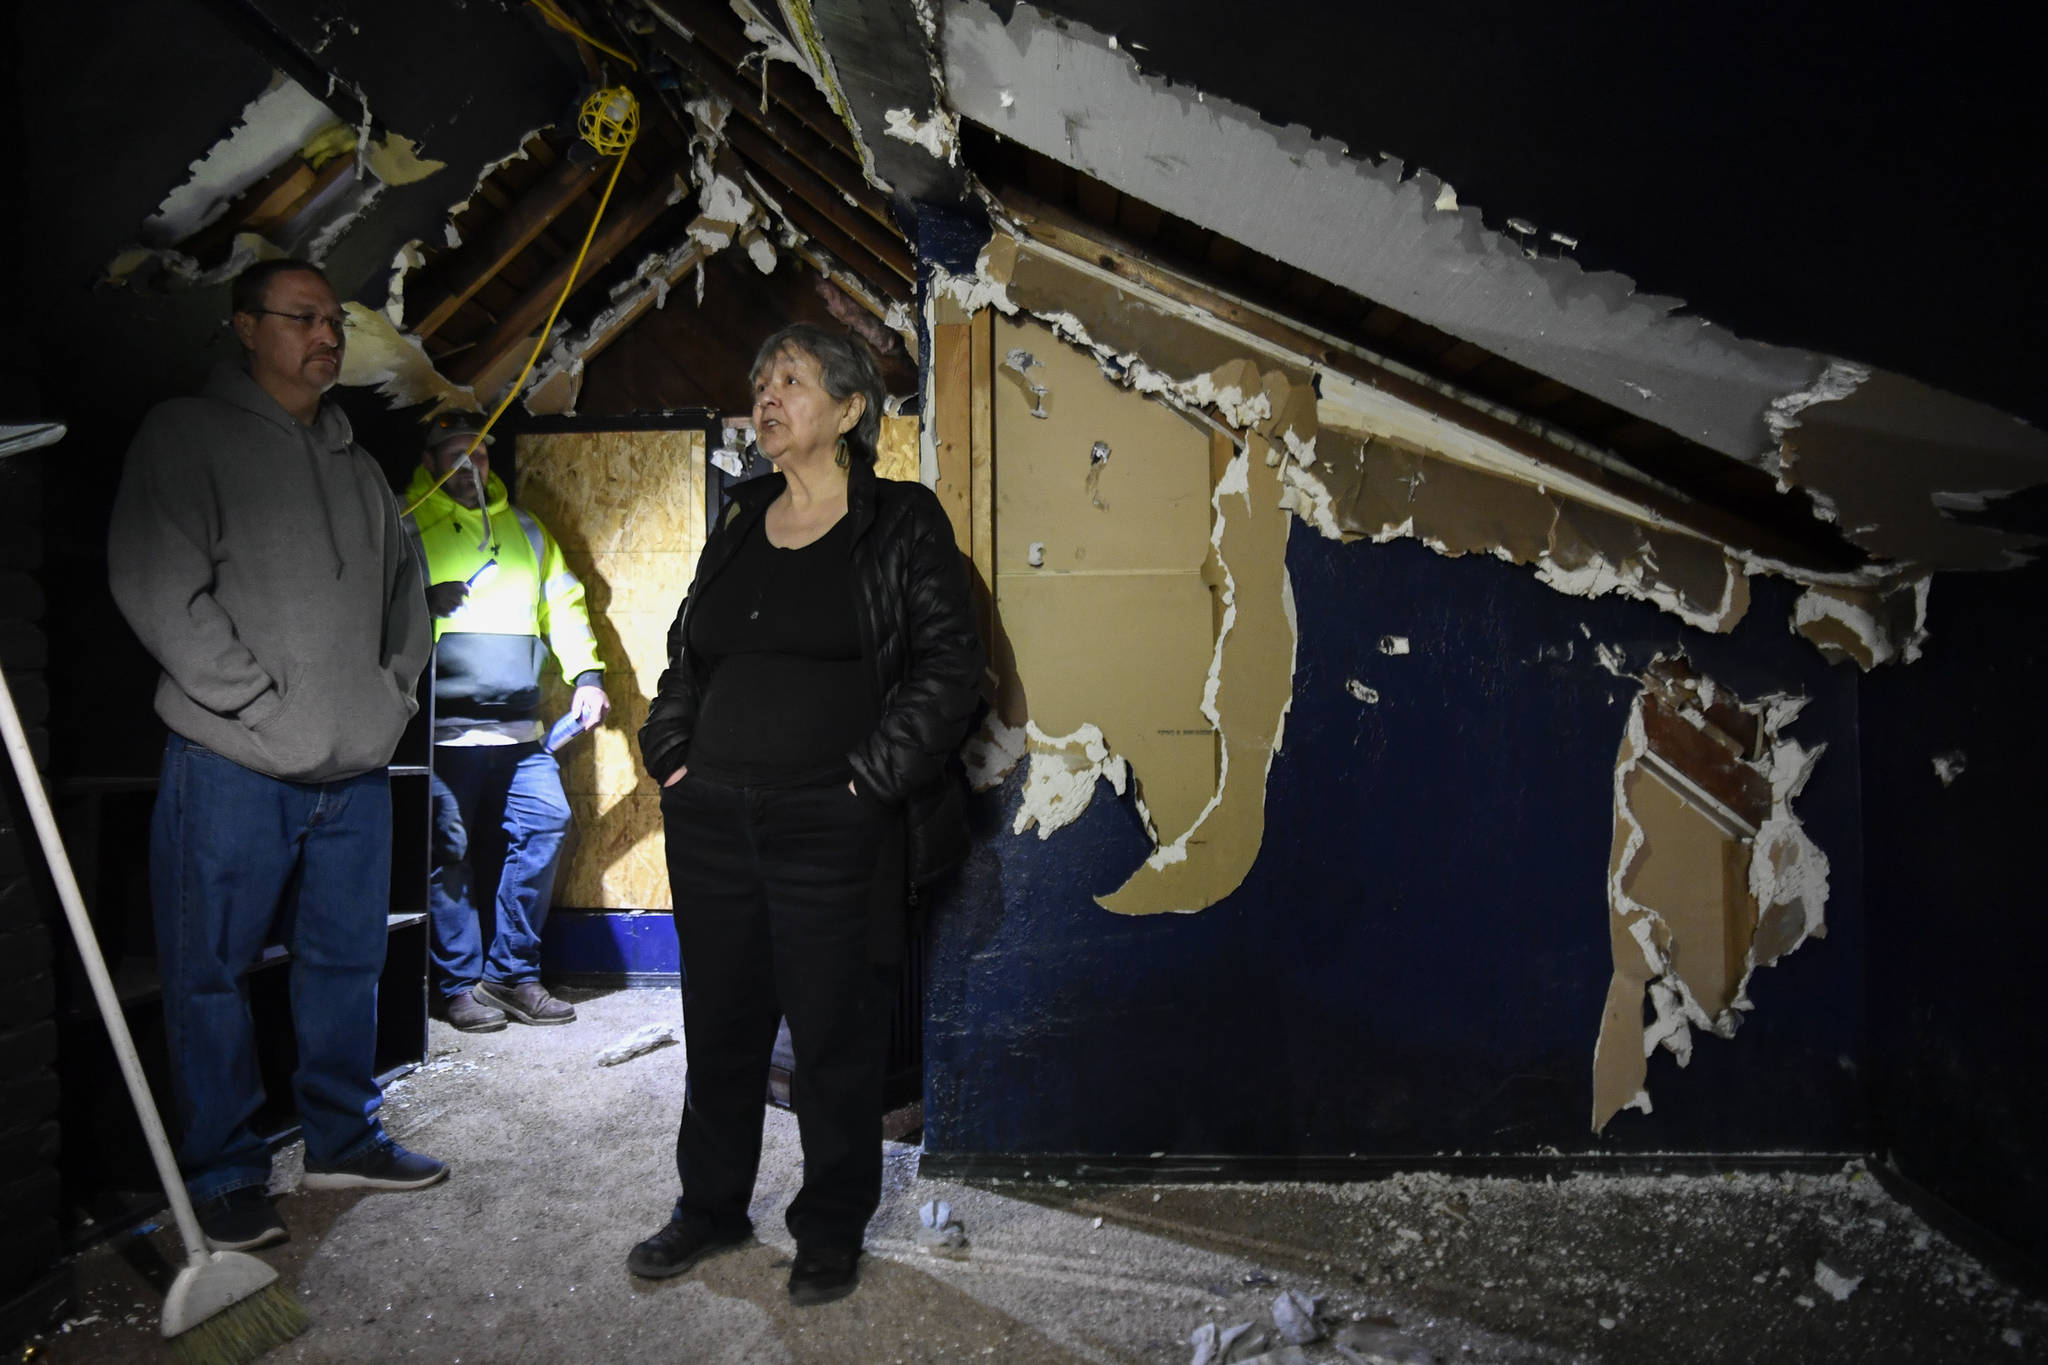 Ernestine Hayes, with her son, Joshua Stephenson, left, and contractor Derik Wythe gives a tour of her fire-damaged house at the corner of 5th and Franklin Street on Wednesday, April 3, 2019. (Michael Penn | Juneau Empire)